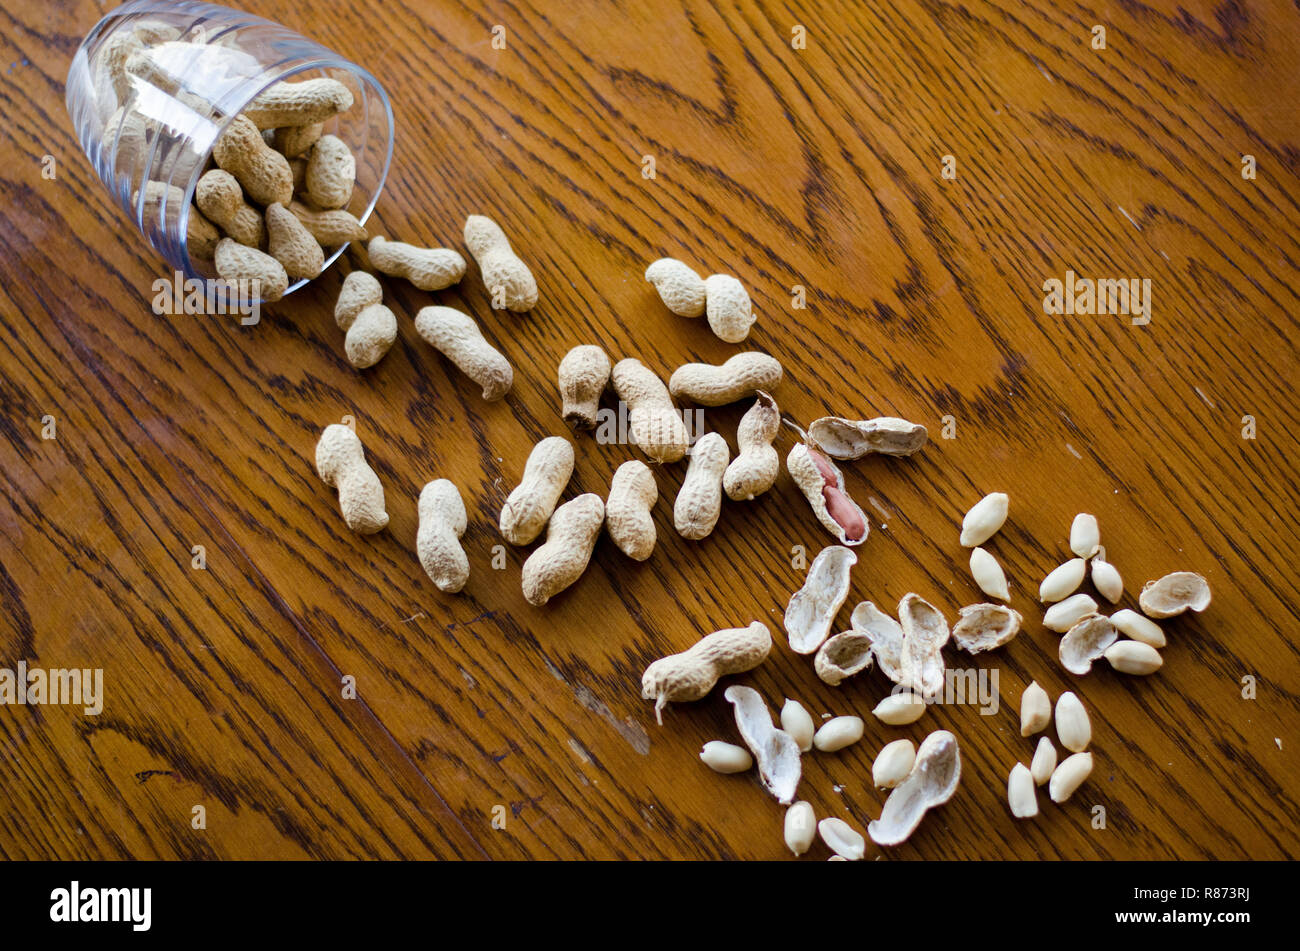 Peanuts from a glass fallen all over the wooden table. Stock Photo